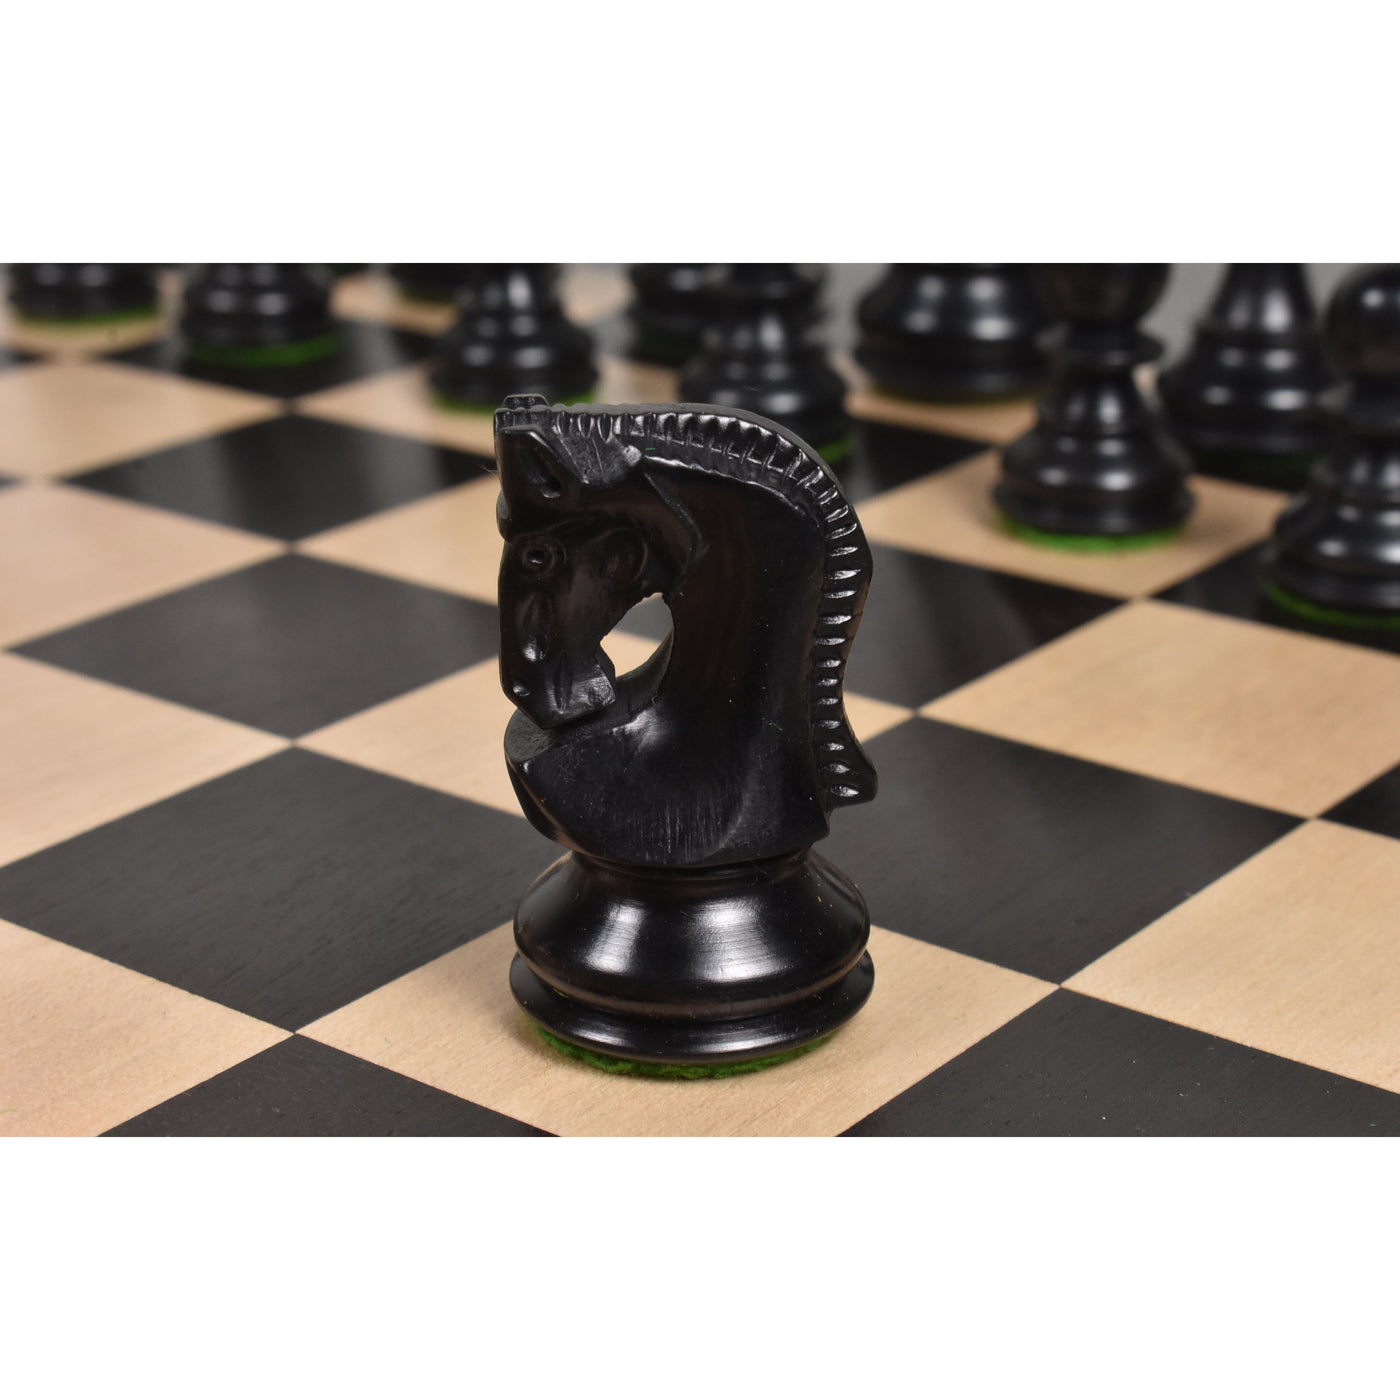 2.6″ Russian Zagreb Chess | Luxury Chess Pieces | Chess Pieces Only